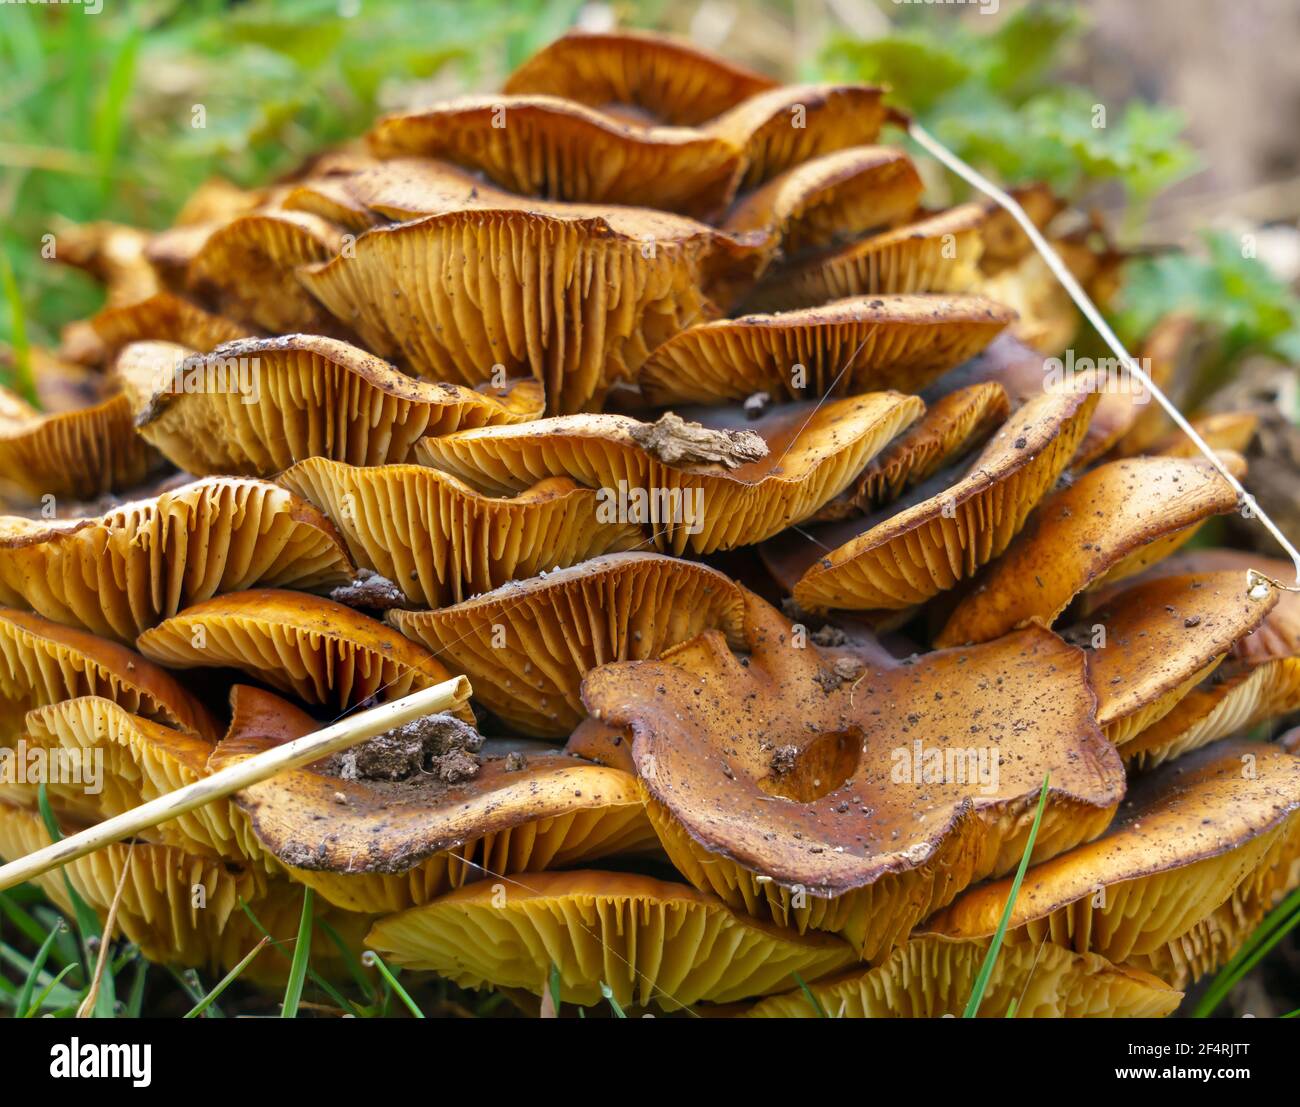 huge stack of red orange brown mushroom fungus plates with exposed gills growing upon each other as a fungus pyramid Stock Photo